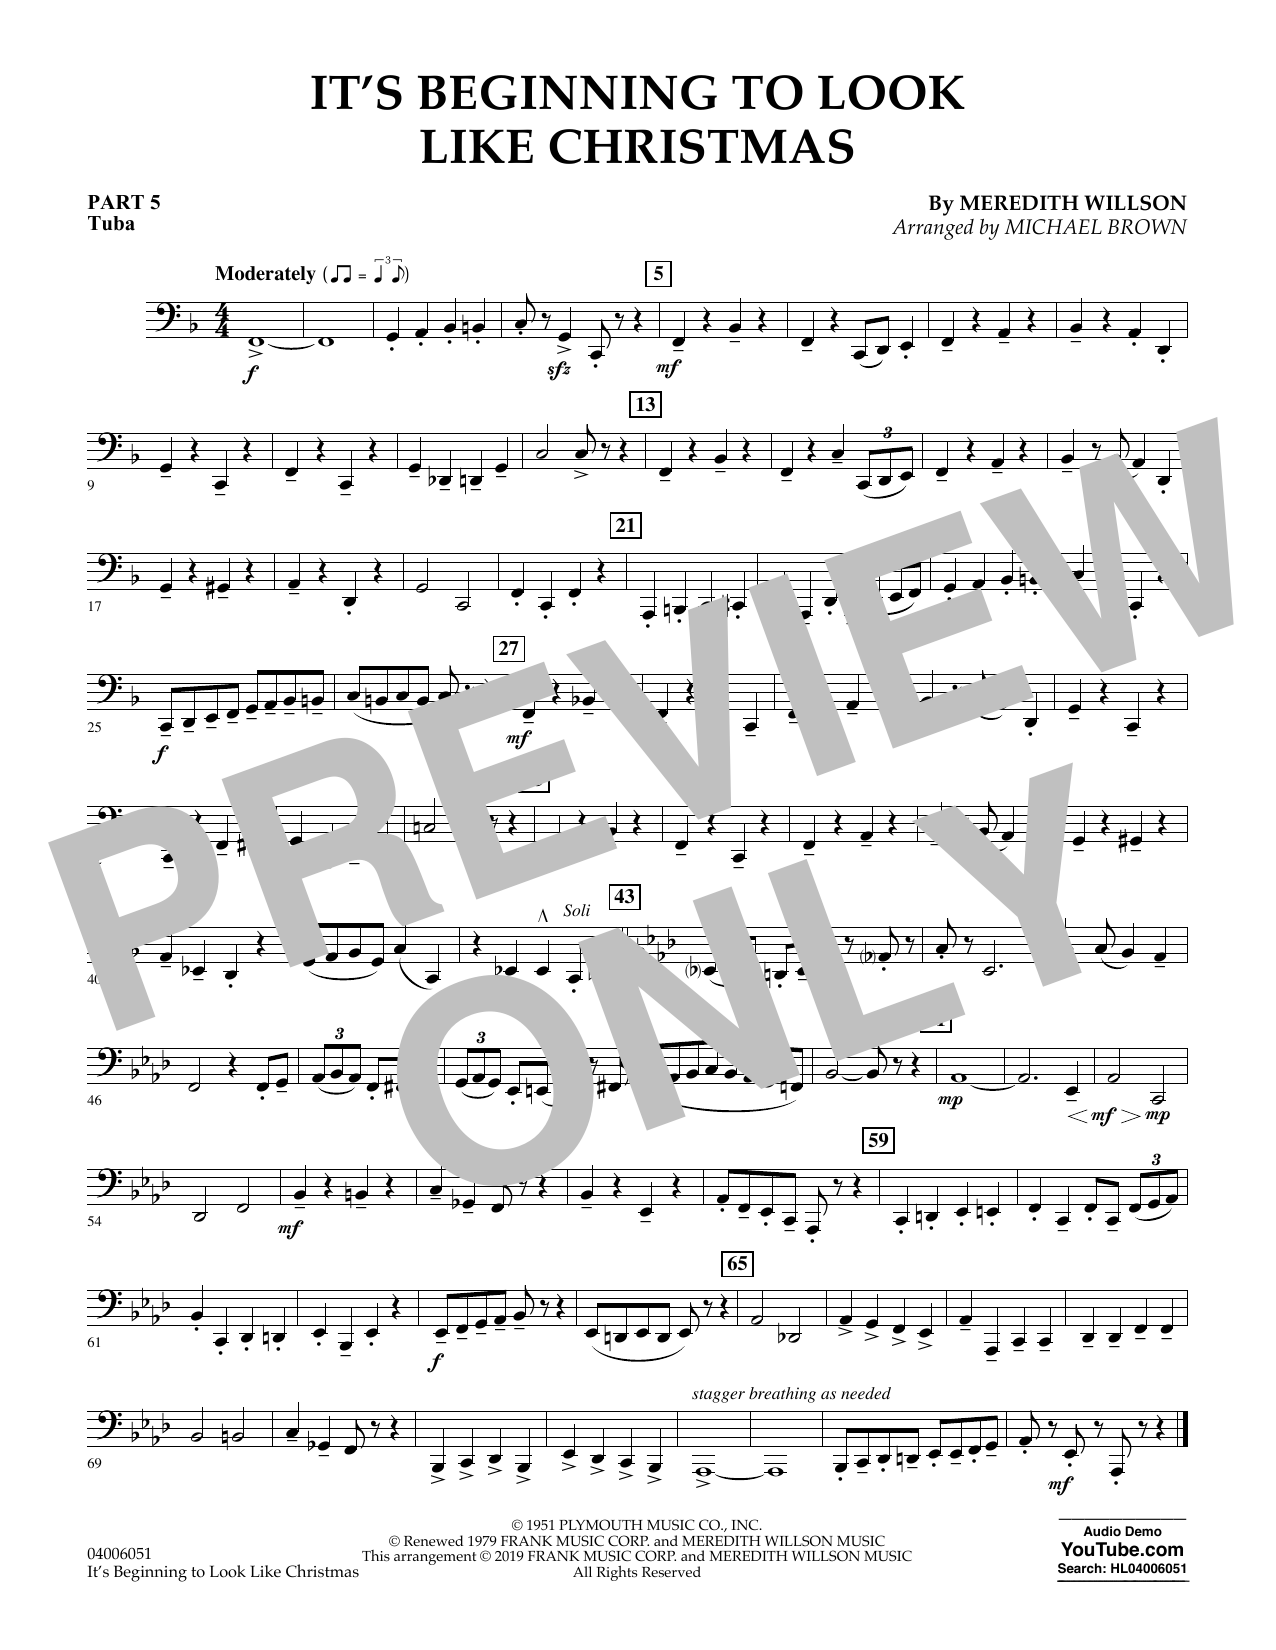 Meredith Willson It's Beginning to Look Like Christmas (arr. Michael Brown) - Pt.5 - Tuba sheet music preview music notes and score for Concert Band including 1 page(s)